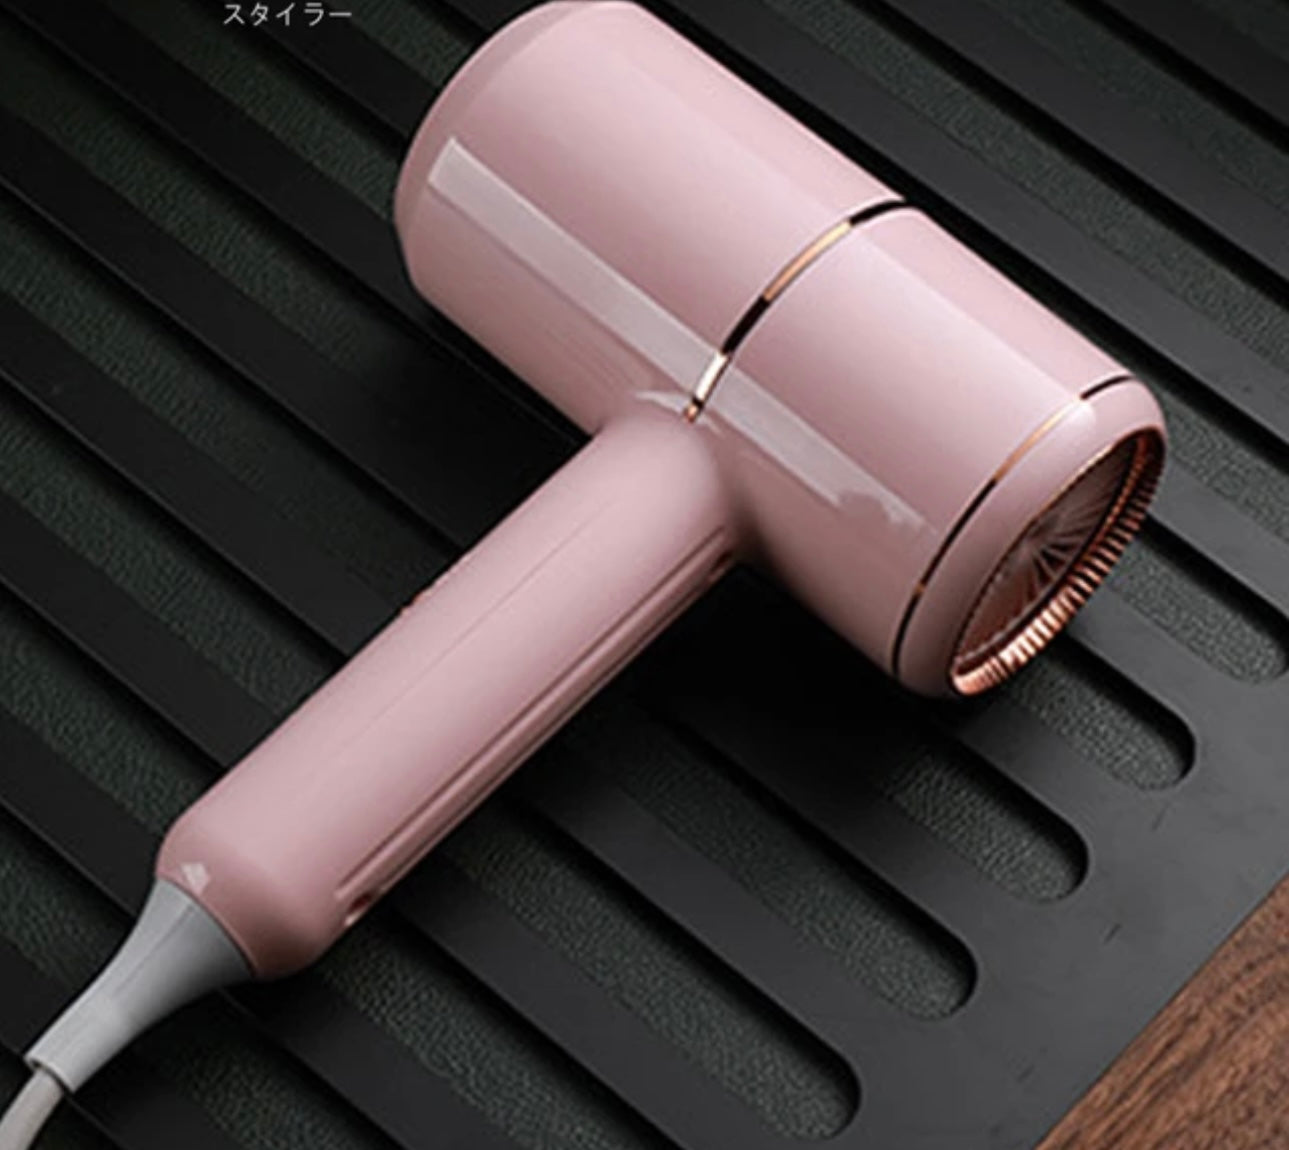 Hair Dryer Hot / Cold Air Hairdryer With Collecting Nozzle Blue Light Anion Blow Dryer For Home Travel Hotel Lightweight